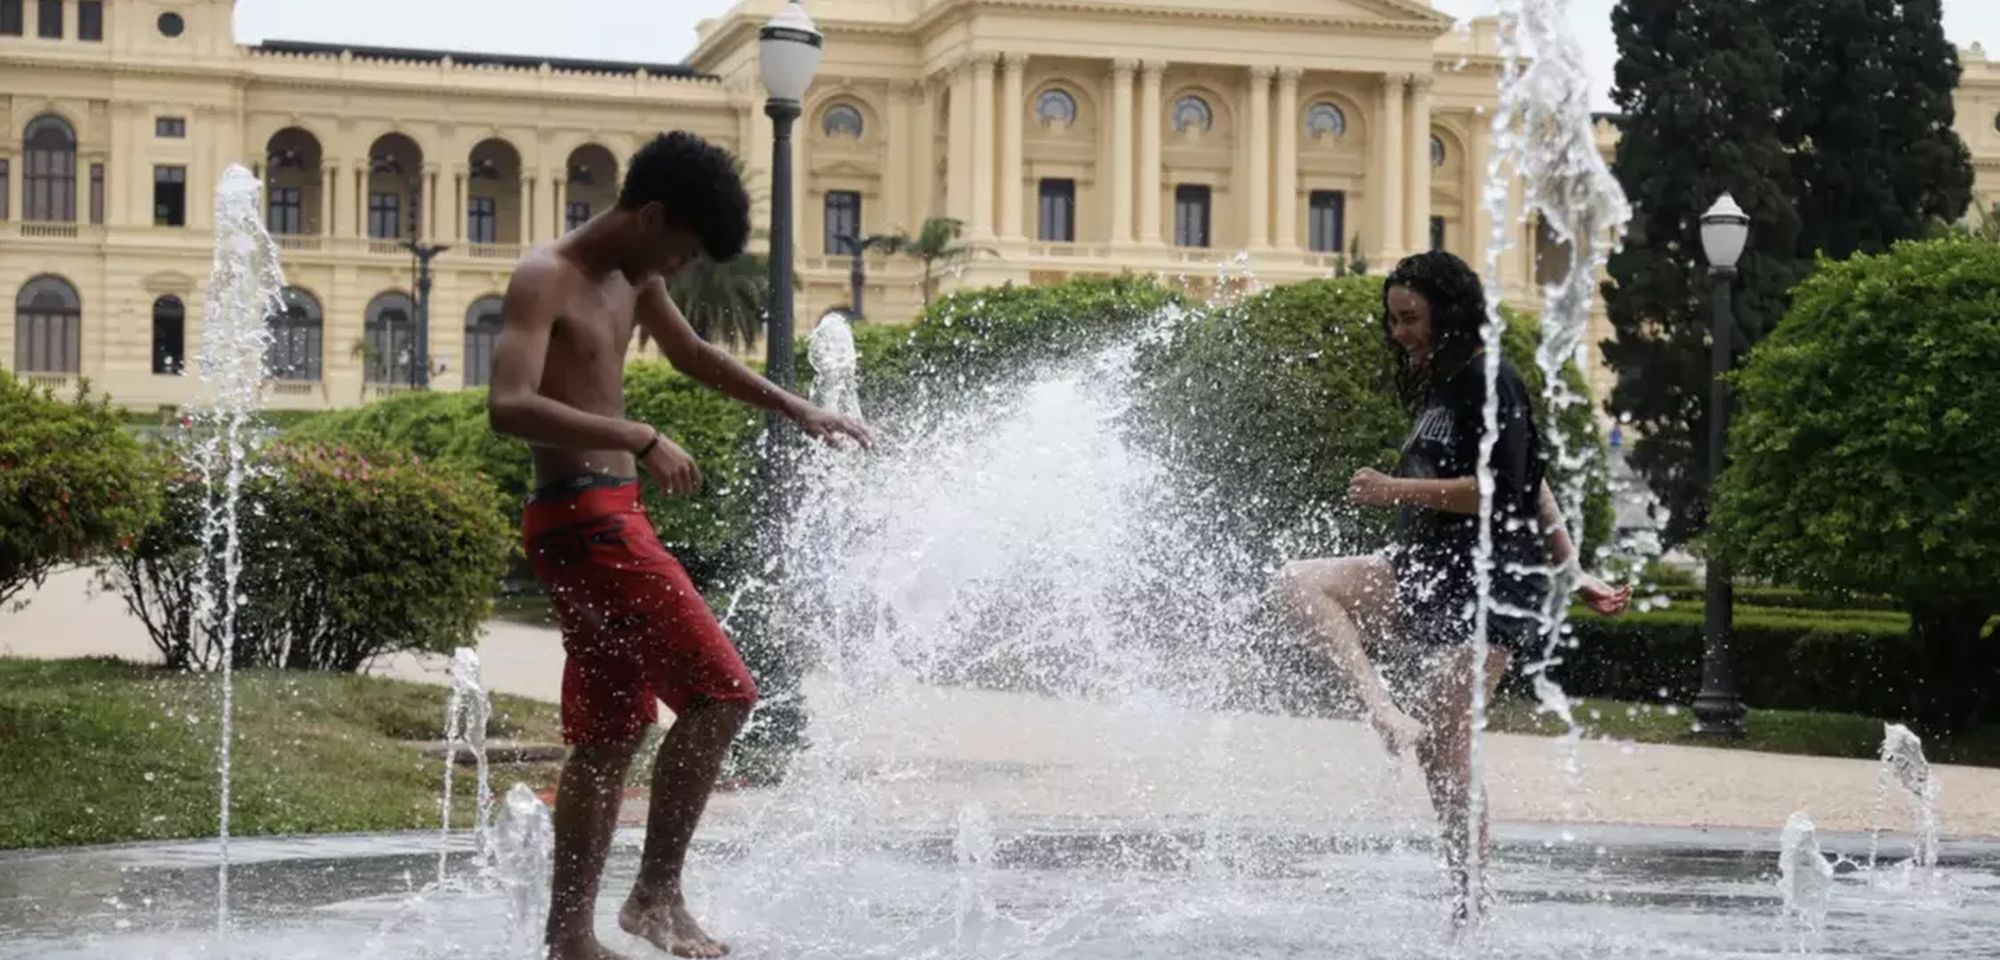 Heat waves killed 50,000 people in Brasil, in the last two decades